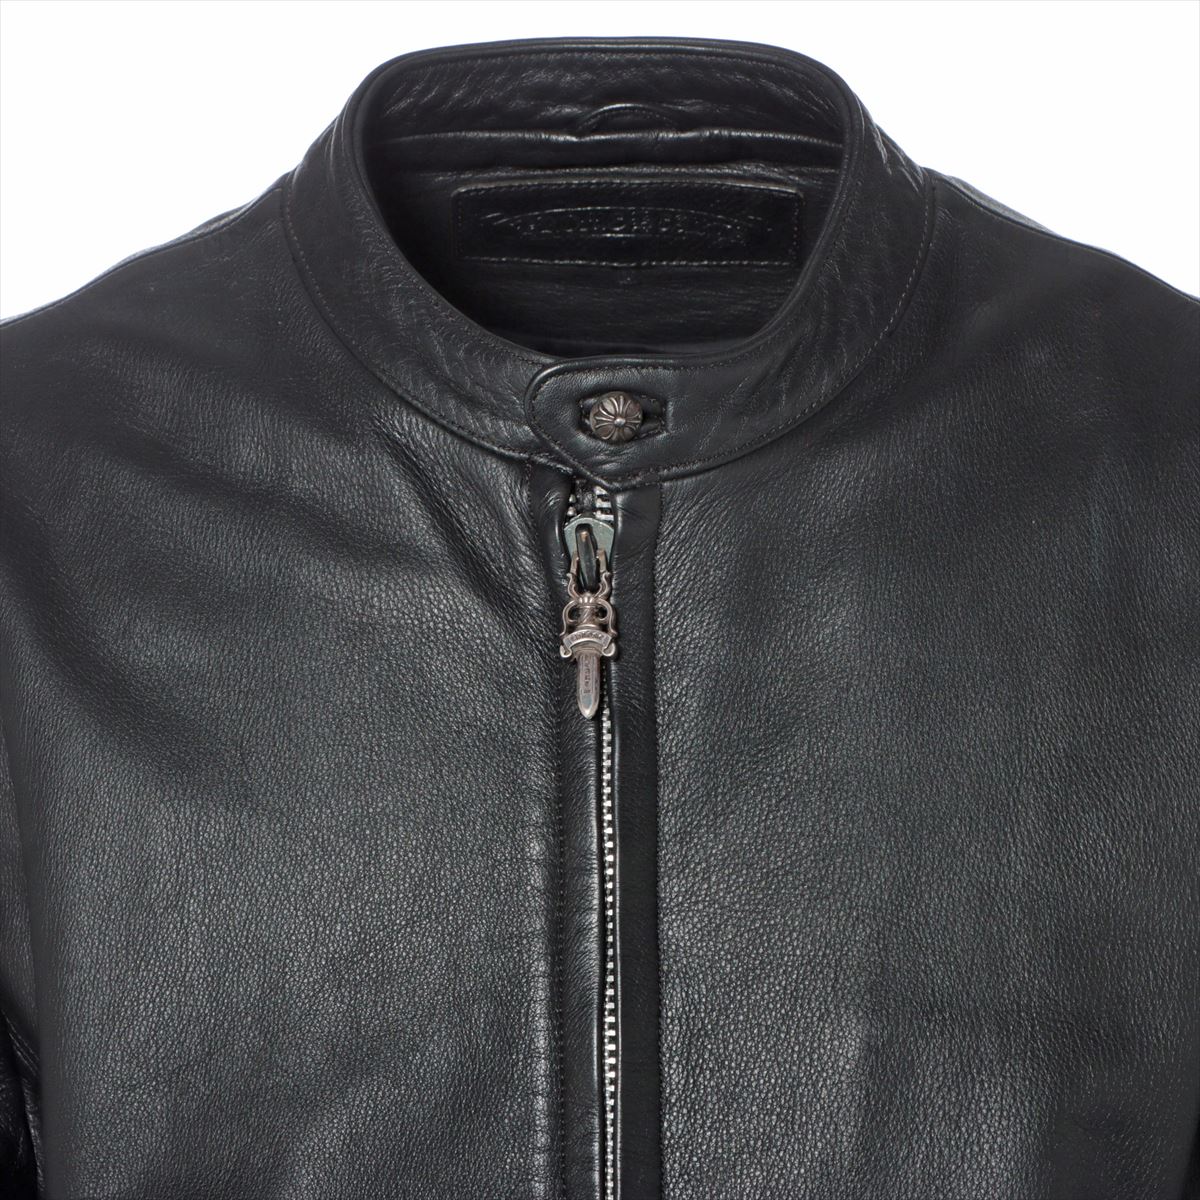 Chrome Hearts Leather jacket Unknown material size S Black racing 2 Quality tag missing